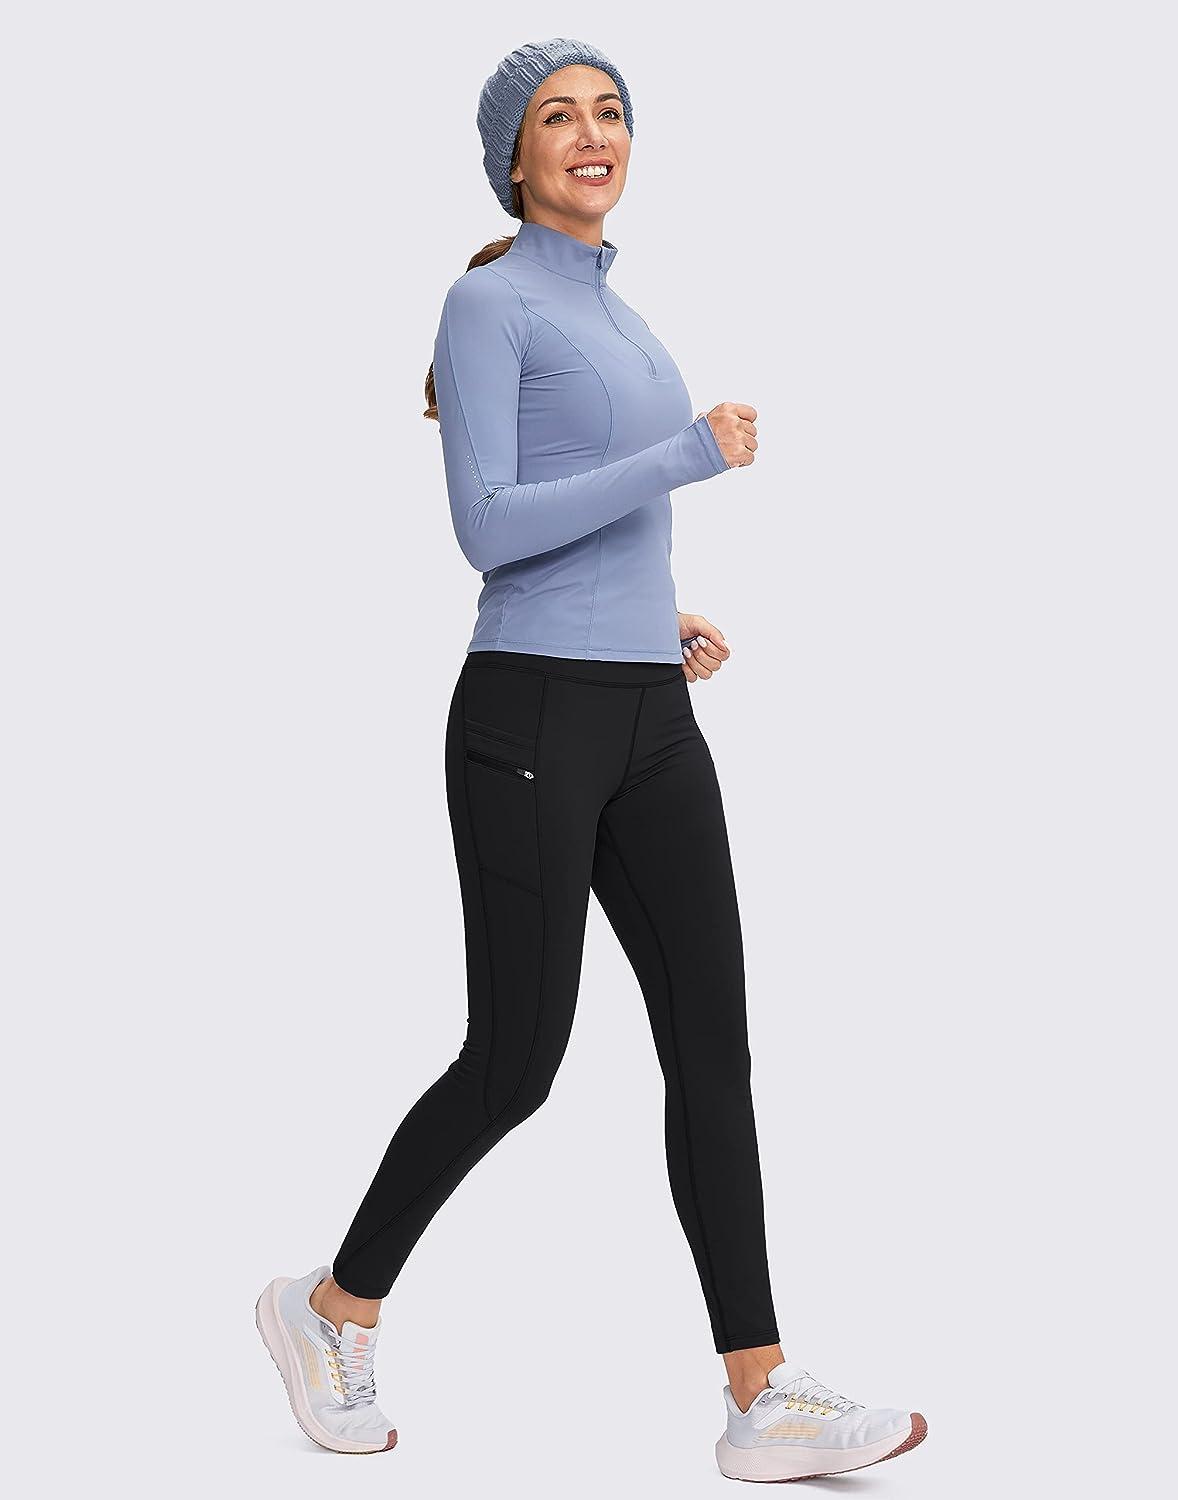 Women's Thermal Fleece Lined Workout Leggings 25 Inches - High